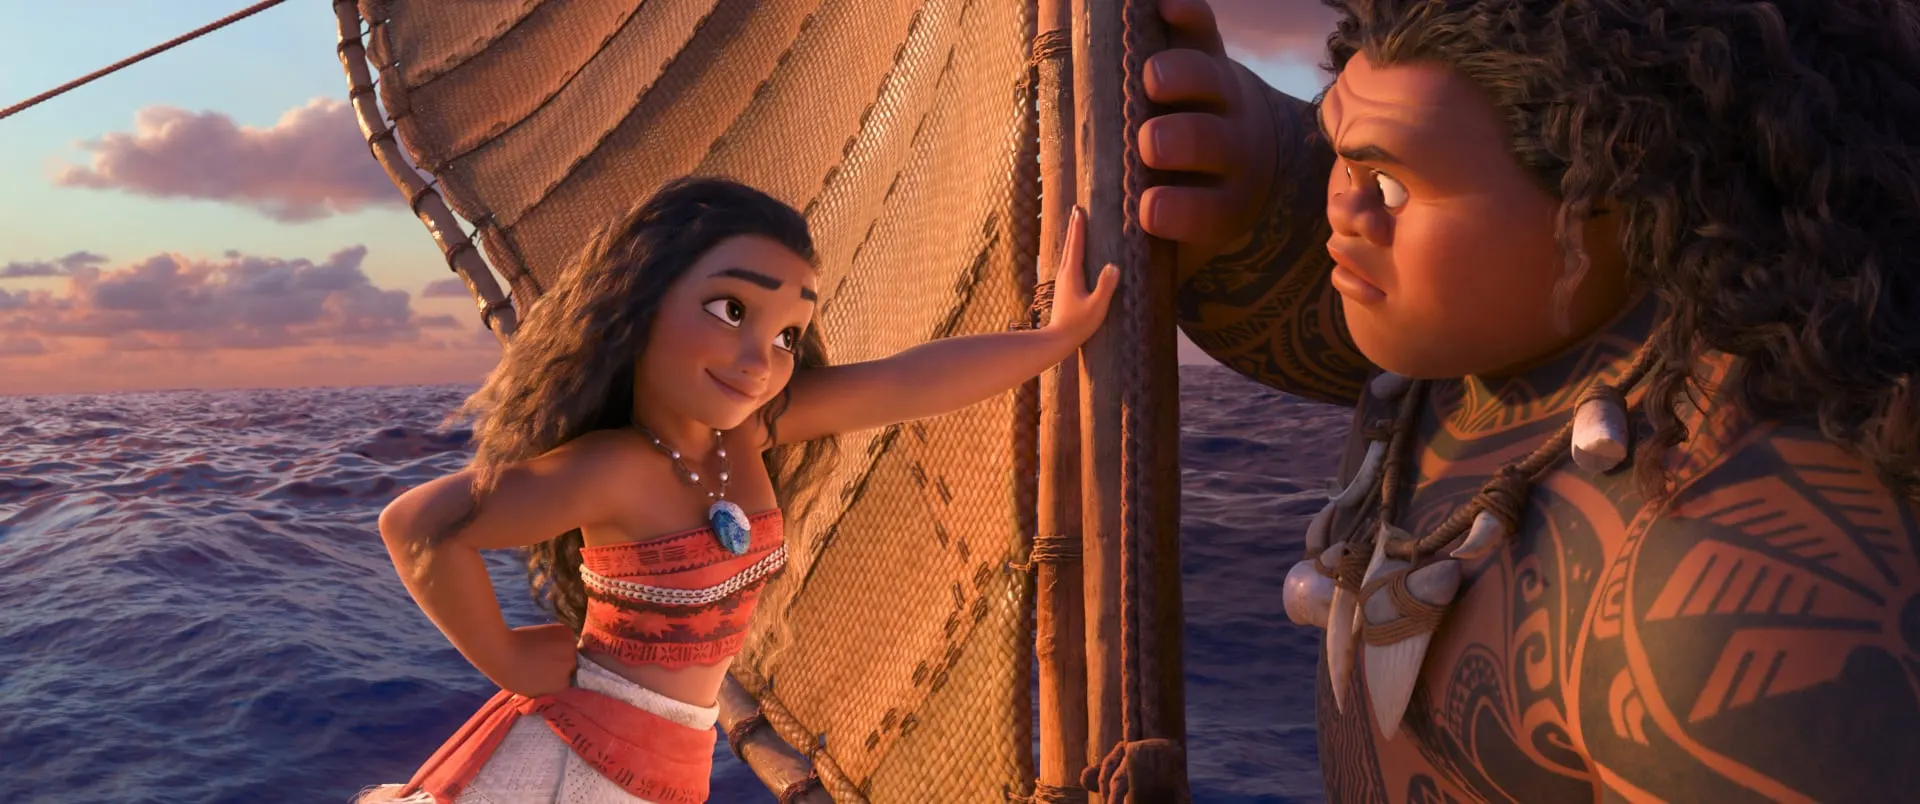 NEW Trailer for Disney's Moana - in Theaters November 23! #MoanaNEW Trailer for Disney's Moana - in Theaters November 23! #Moana